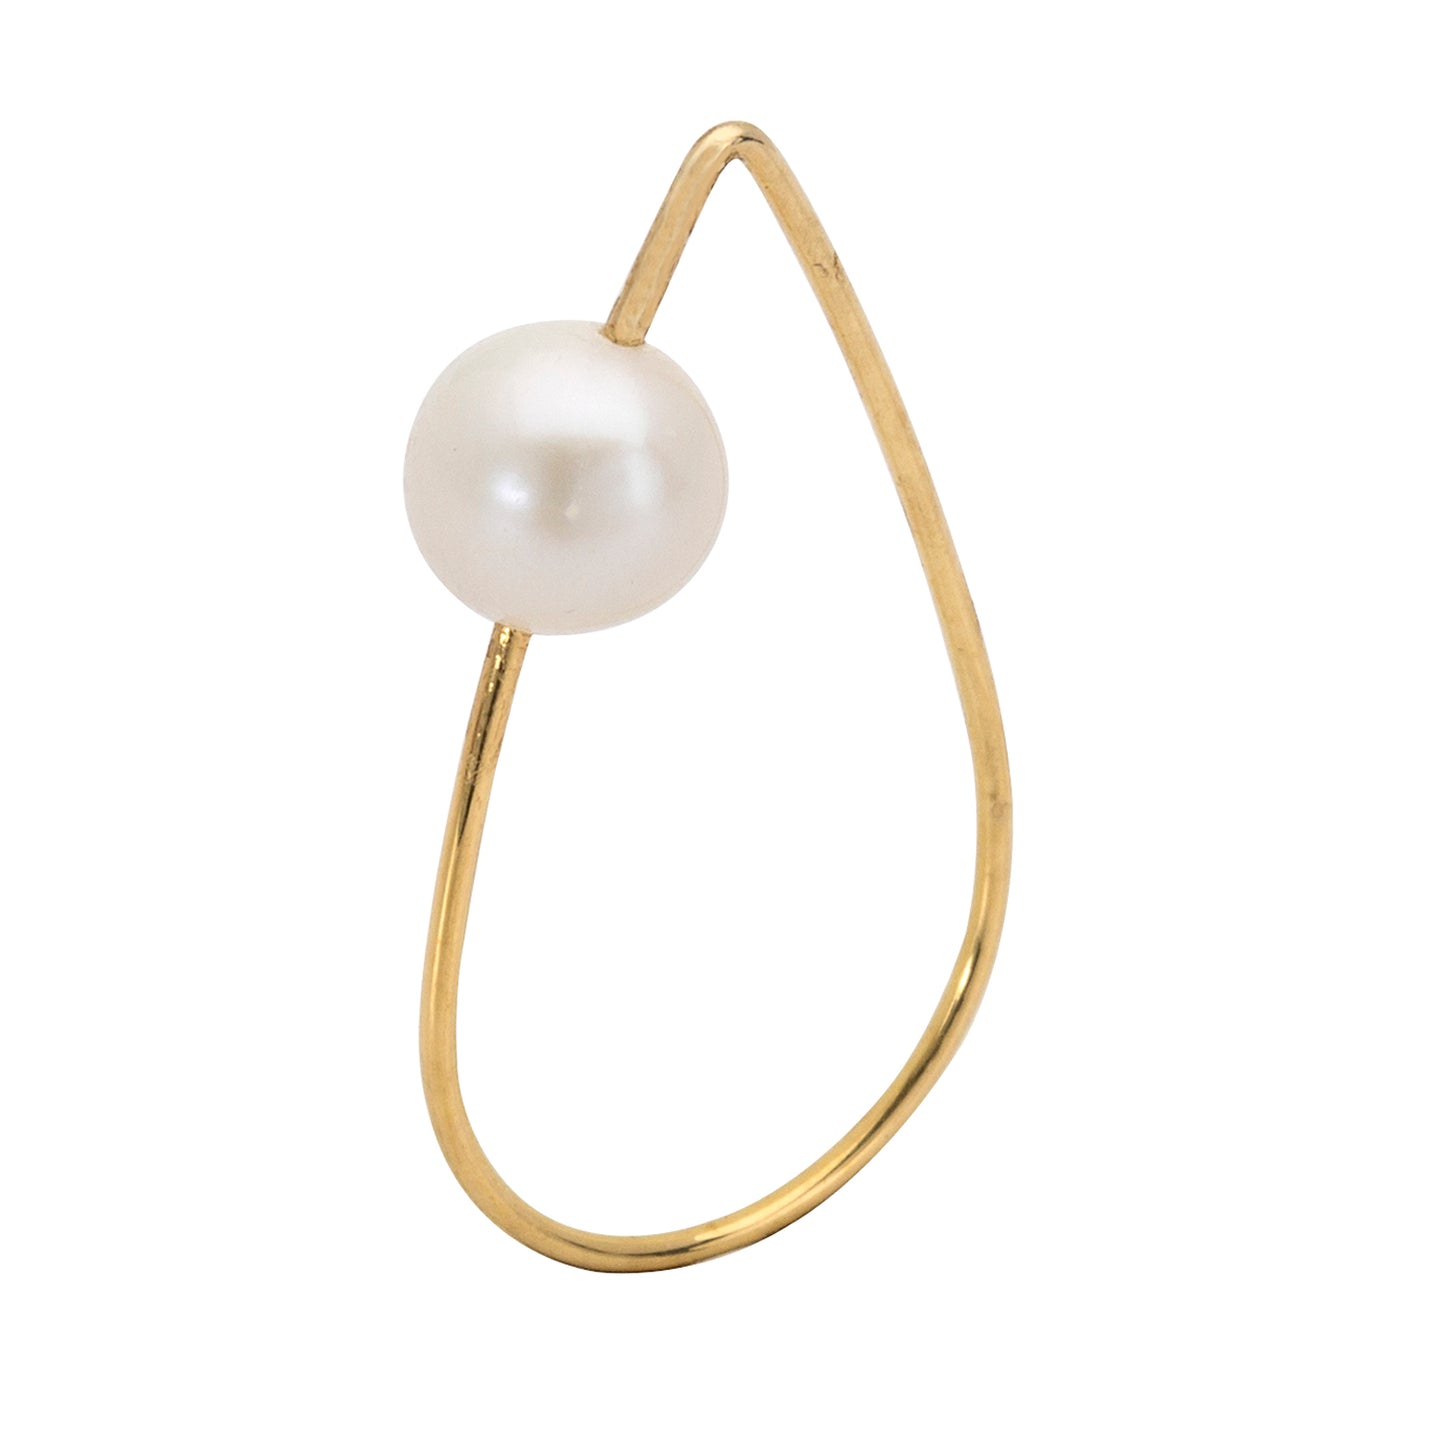 Teardrop Ring with Natural Freshwater Pearls